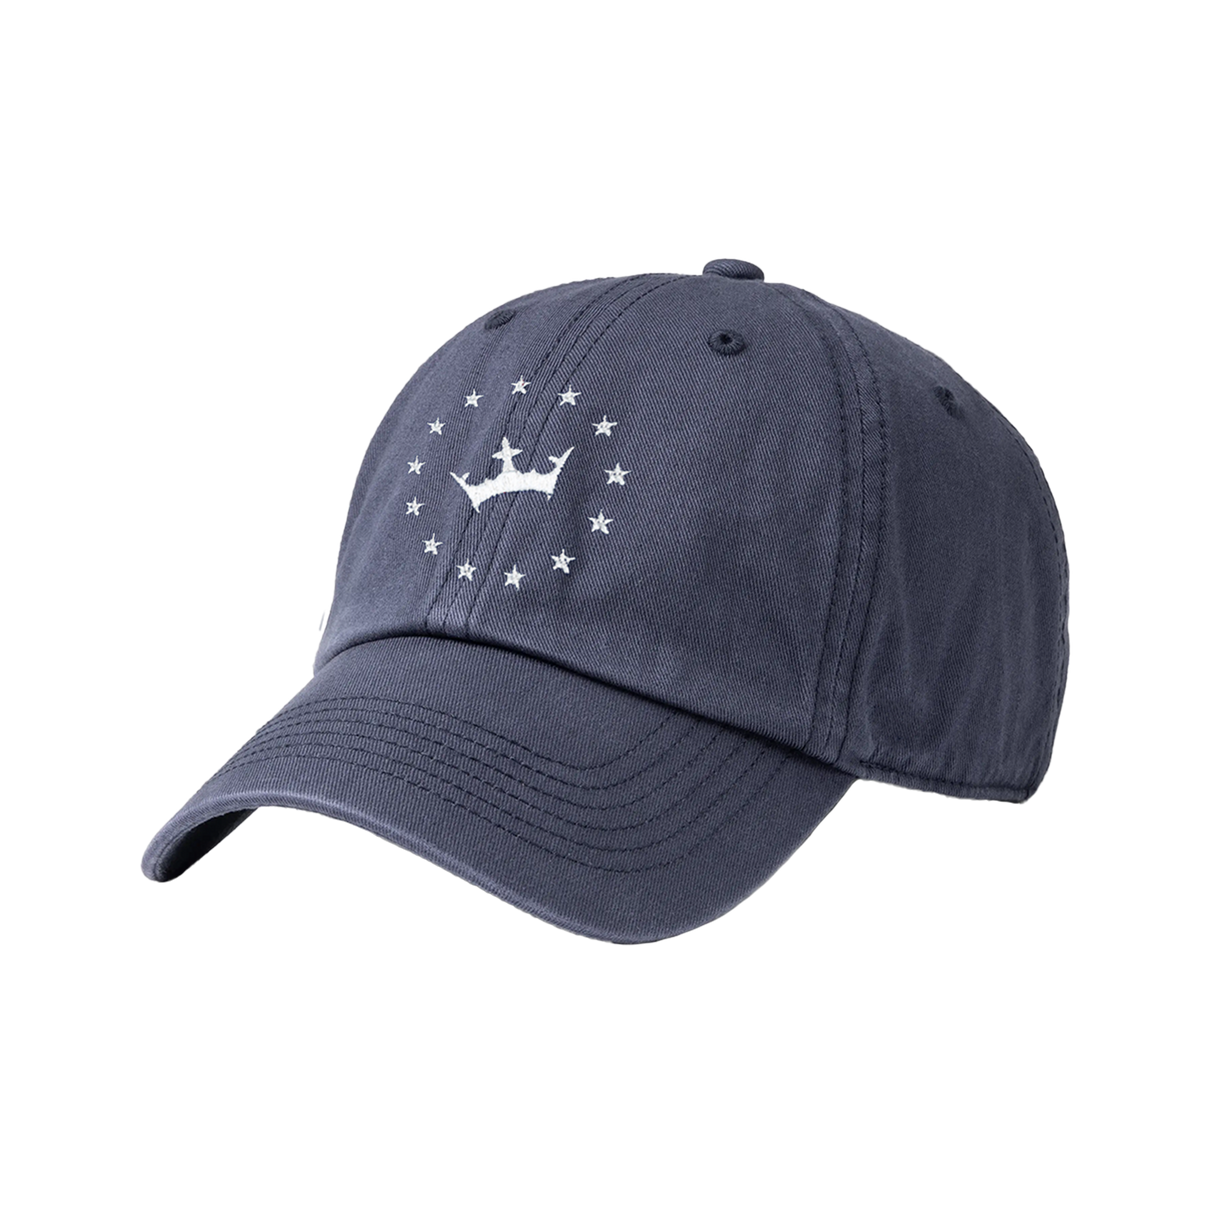 DraftKings x '47 Stars Clean Up Hat